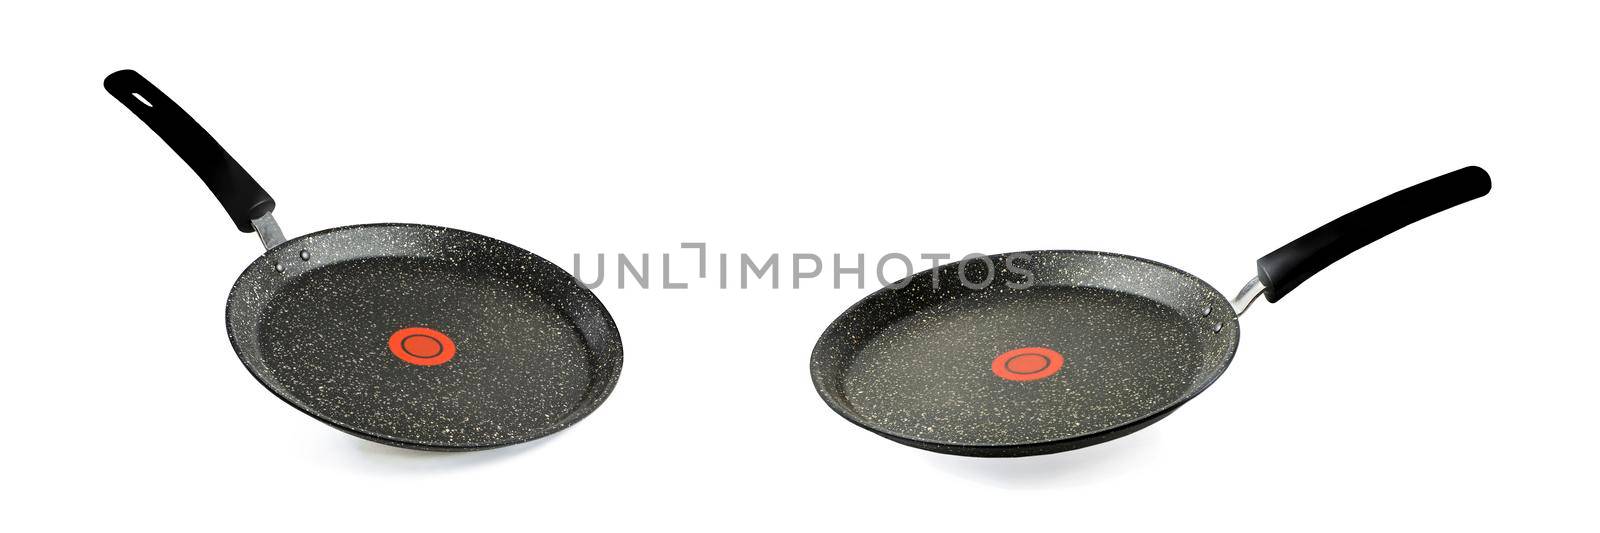 Black frying pan isolated on white background. Frying pan with non-stick coating and red temperature indicator. Isolate with shadow.